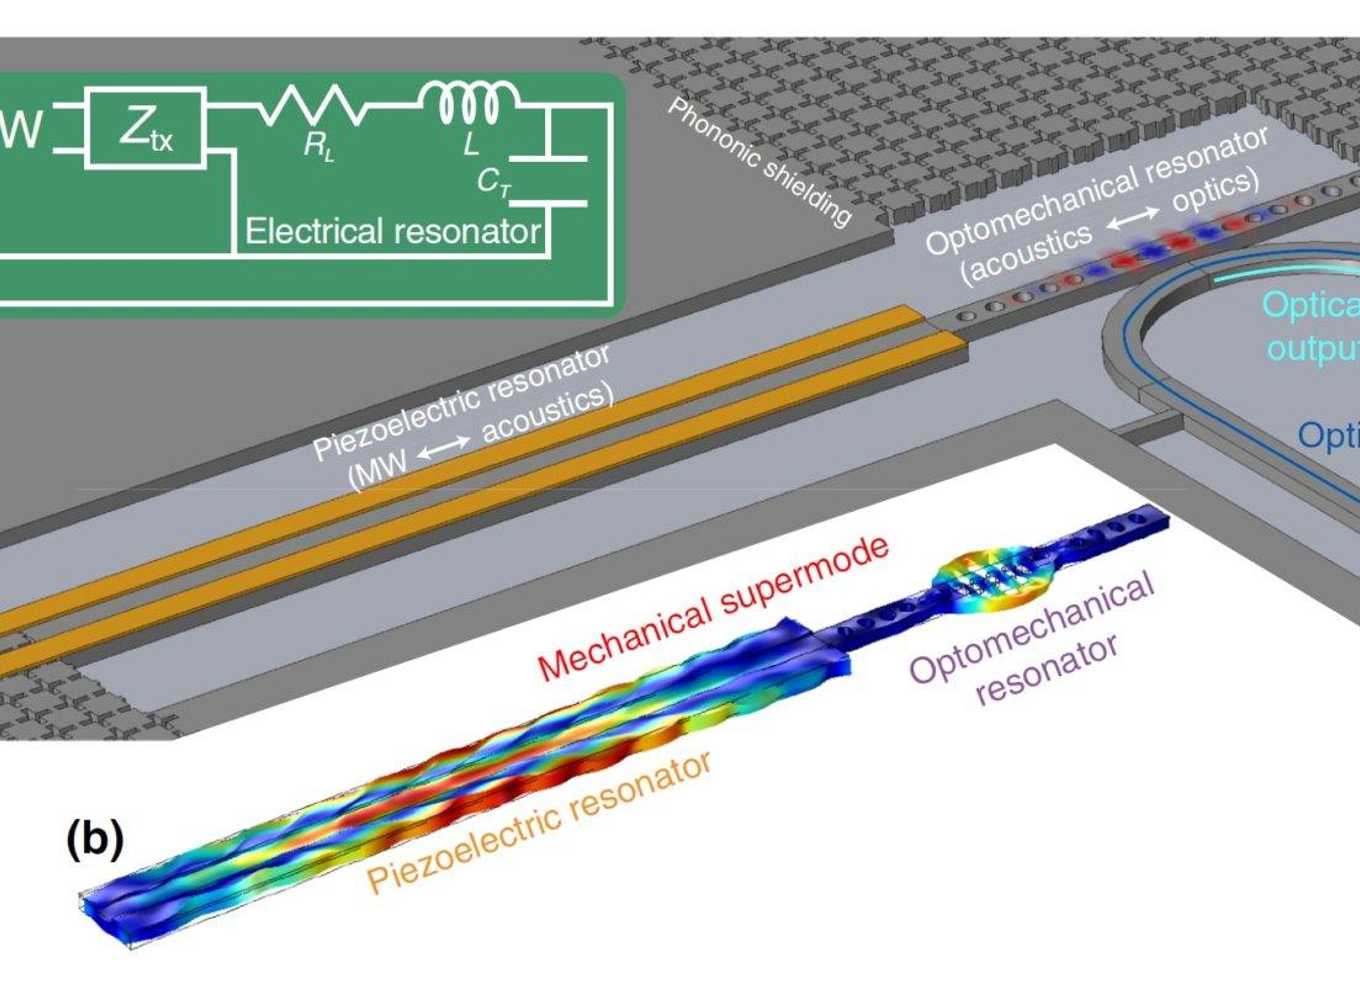 Proposed microwave-to-optical quantum transducer based on a coupled piezoelectric and optomechanical resonator system (Wu et al, Phys Rev. Applied, 2020).